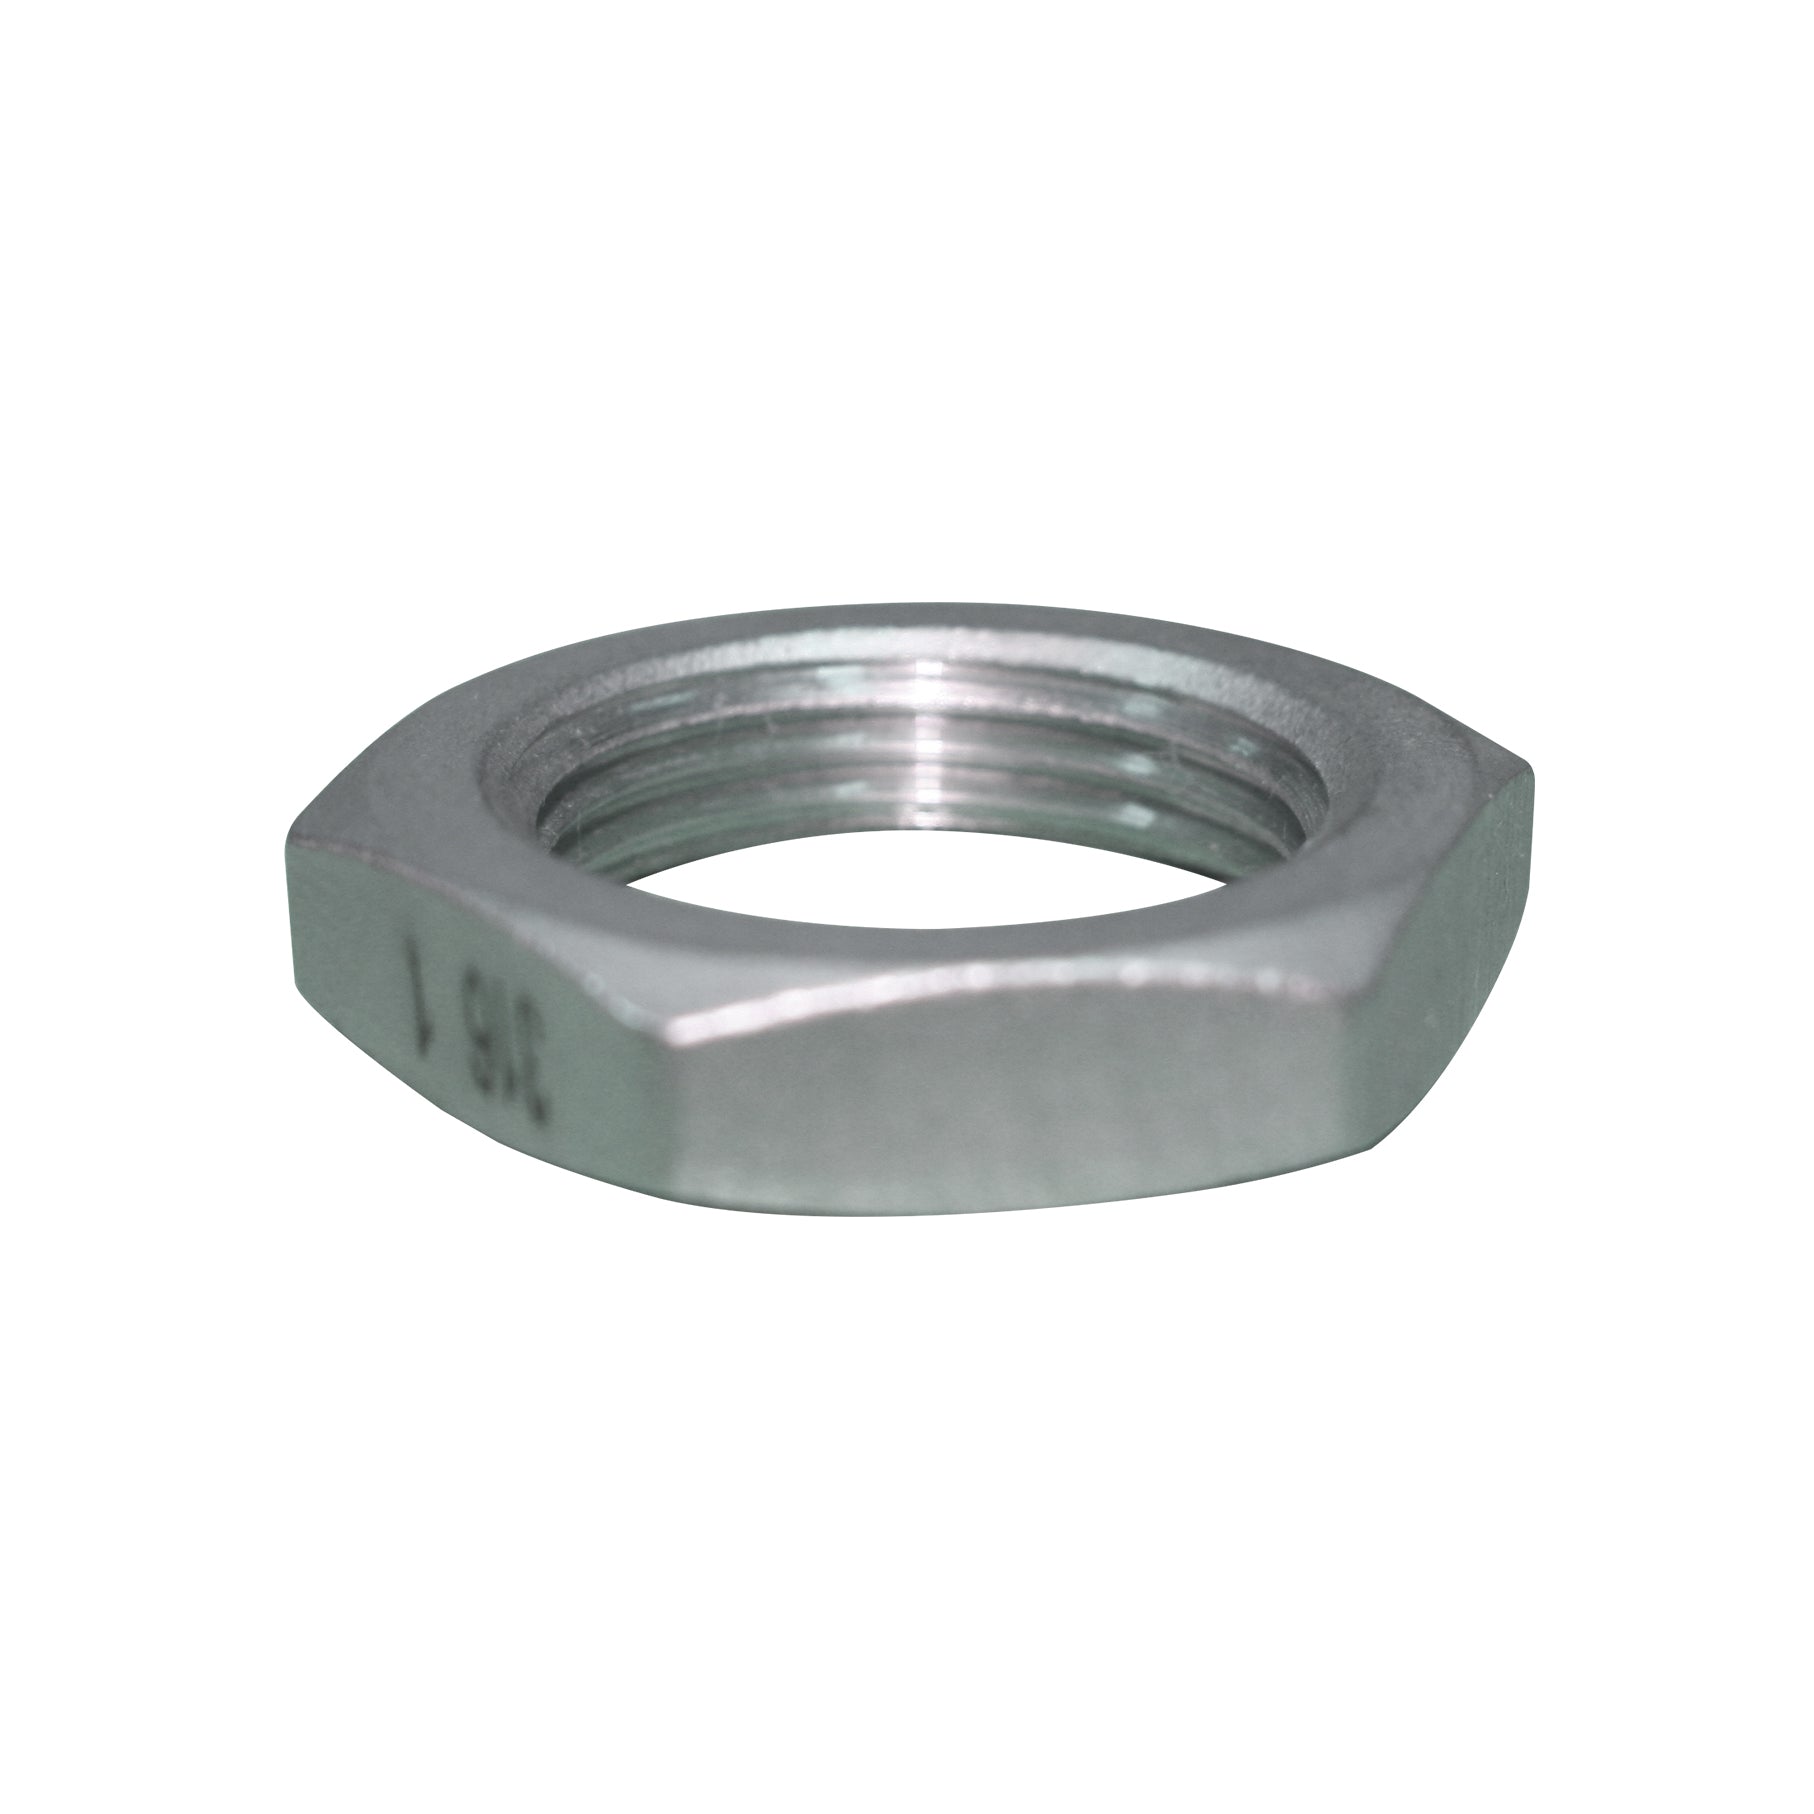 1 8 stainless steel back nut ss150